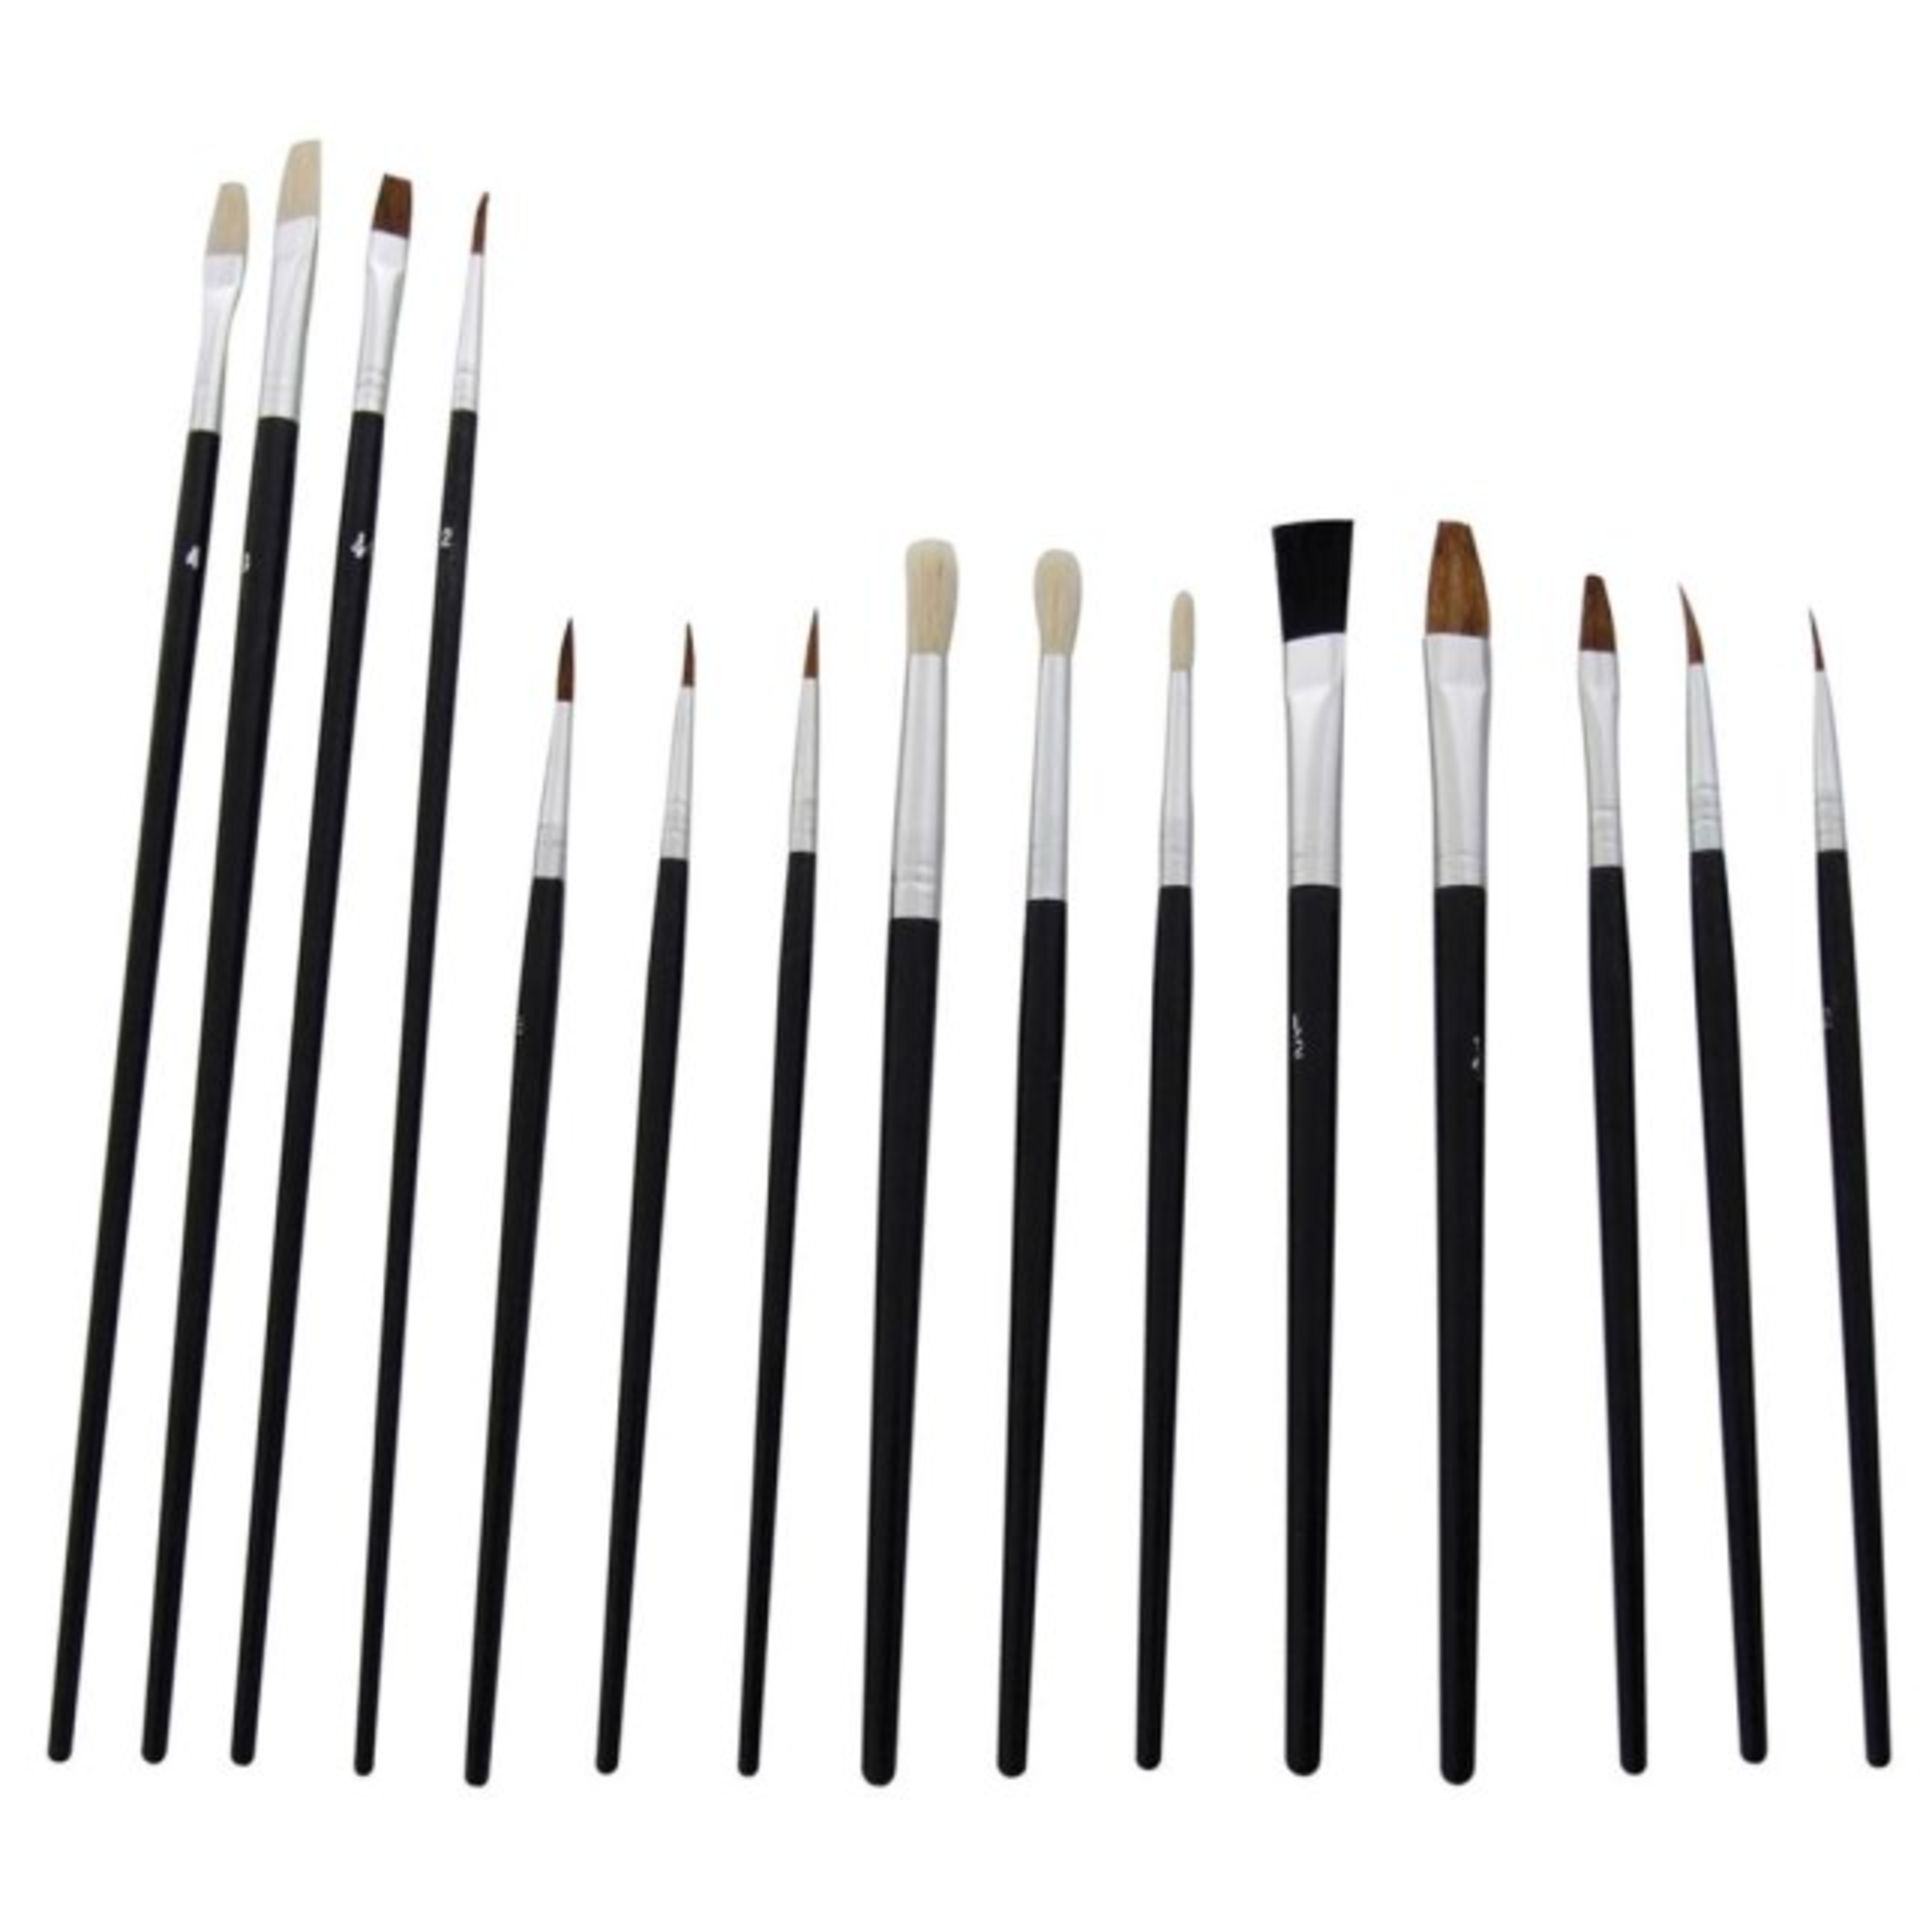 V Brand New Two Artist Brush Sets Being Suitable For Watercolours And Oils/Model Making Etc